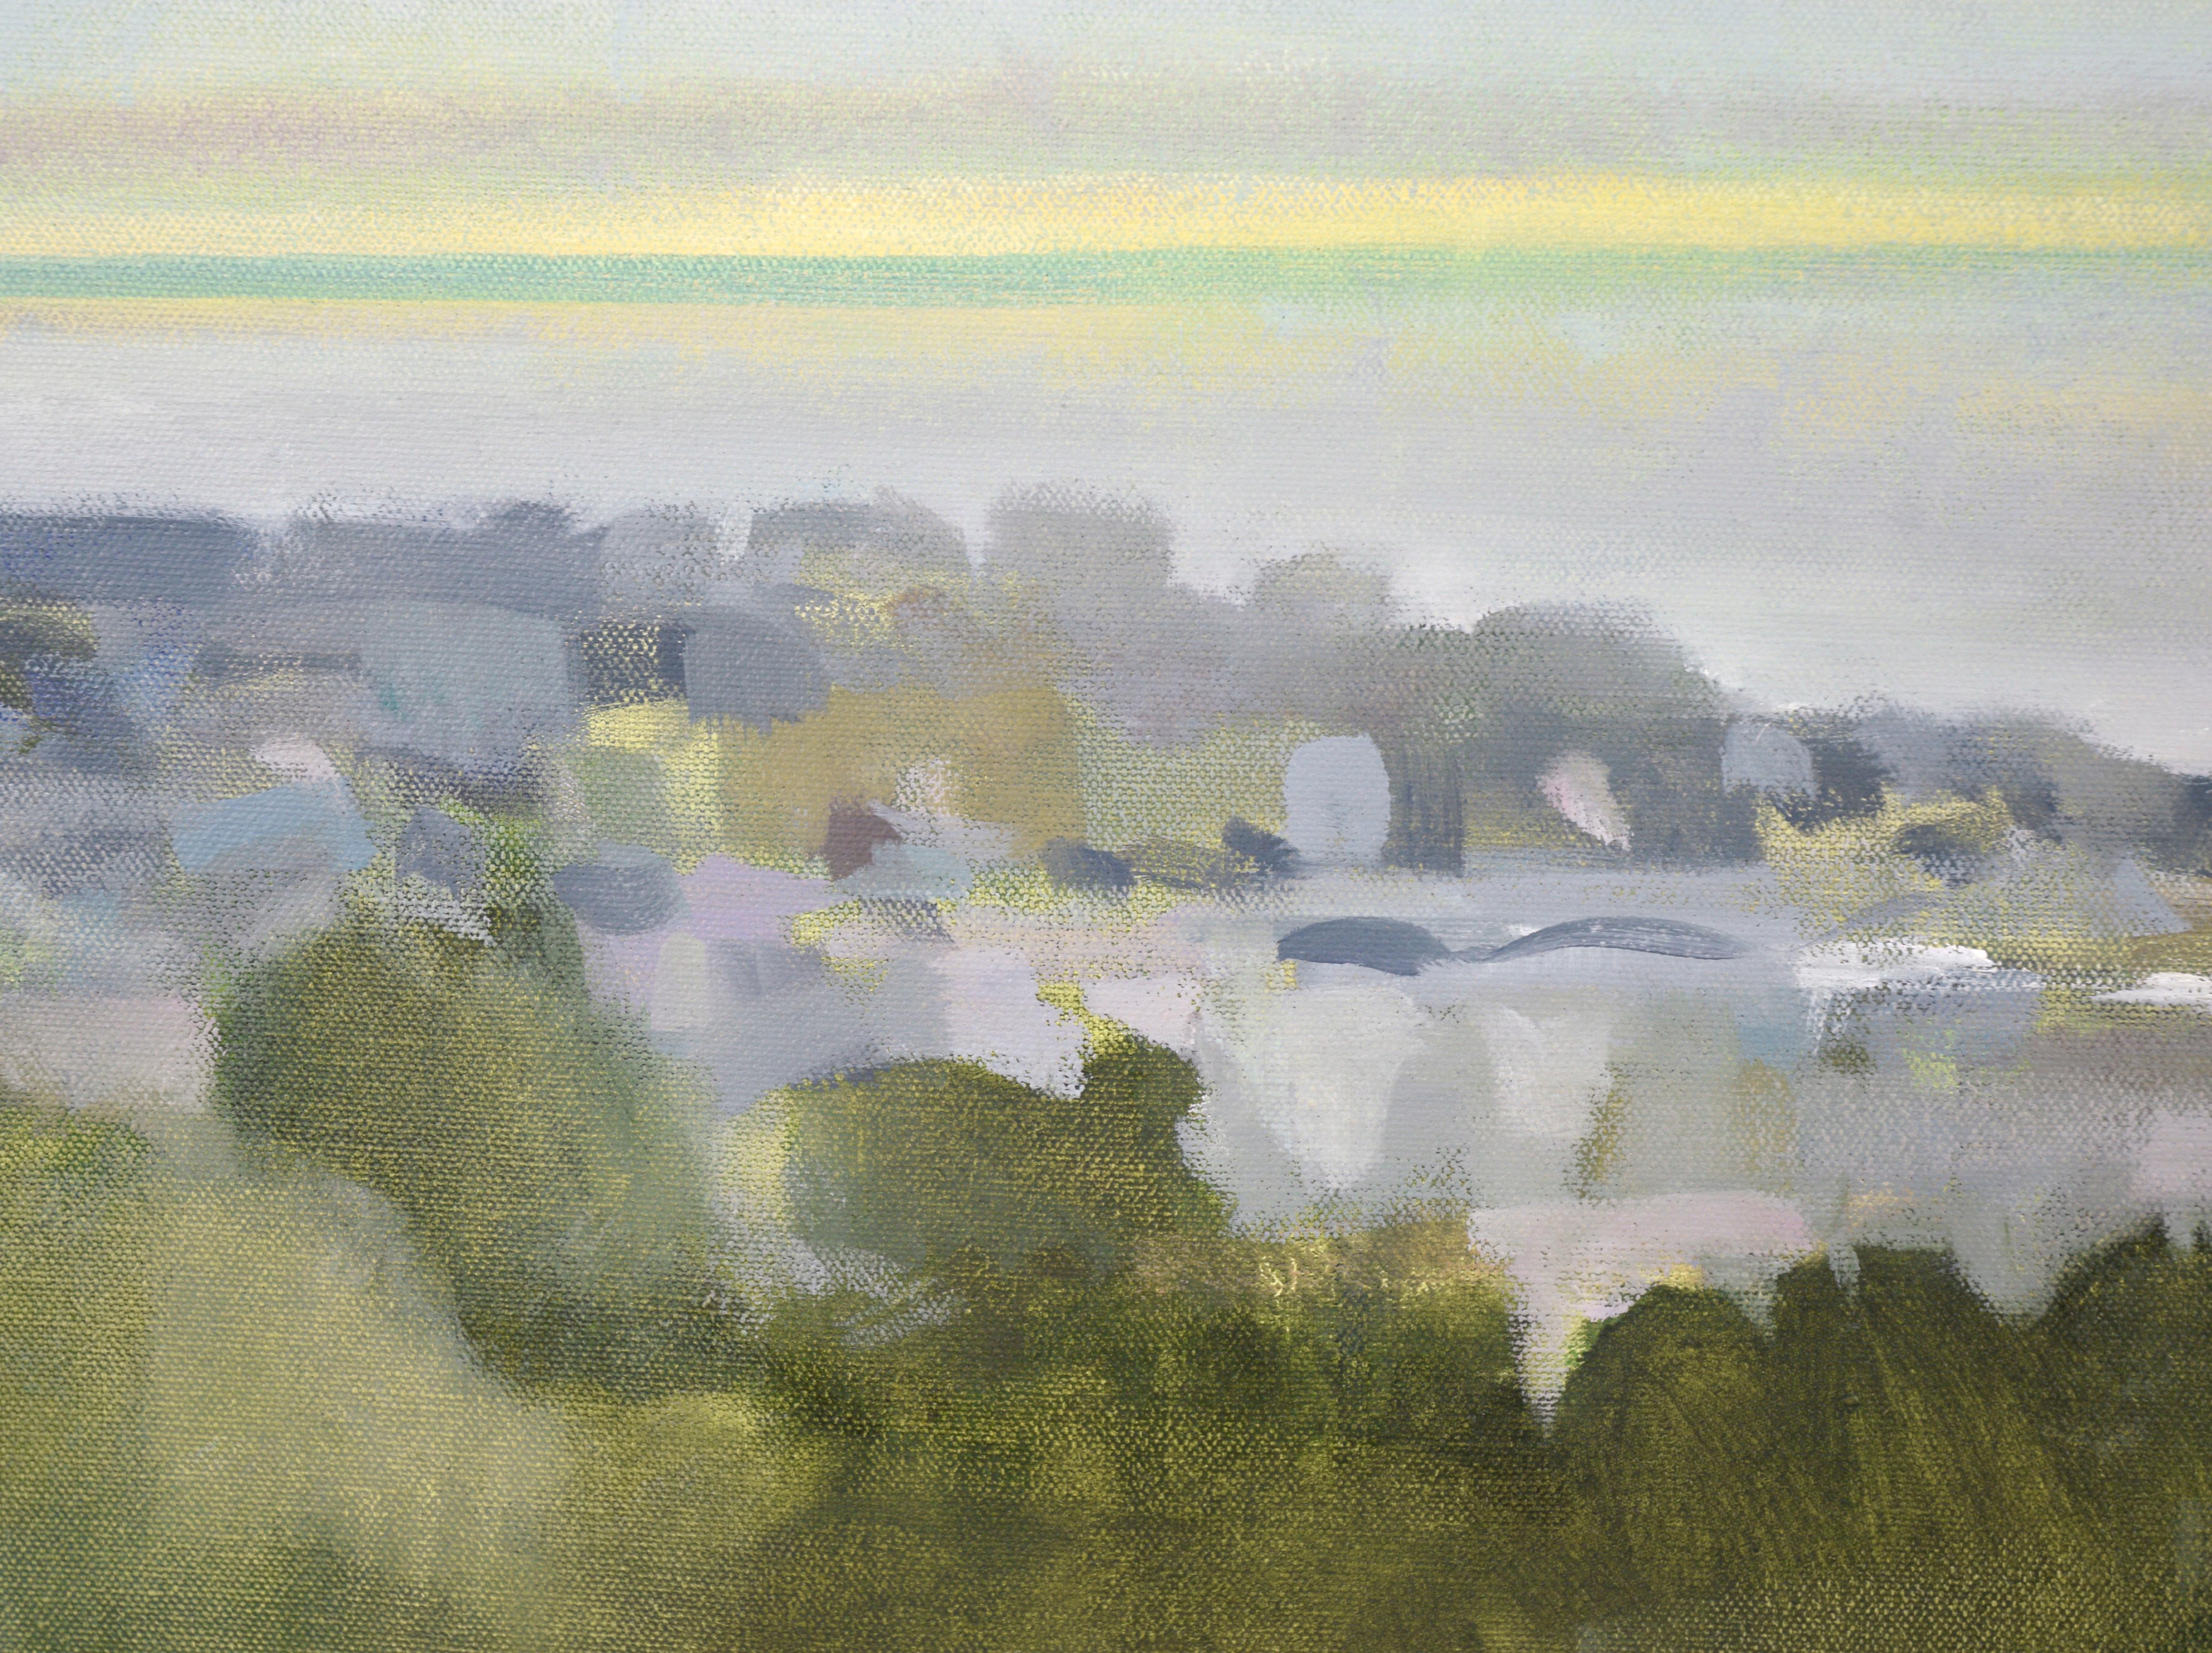 Overlooking Santa Cruz and Monterey Bay - Plein Air Landscape in Oil on Canvas - American Impressionist Painting by Brian Rounds